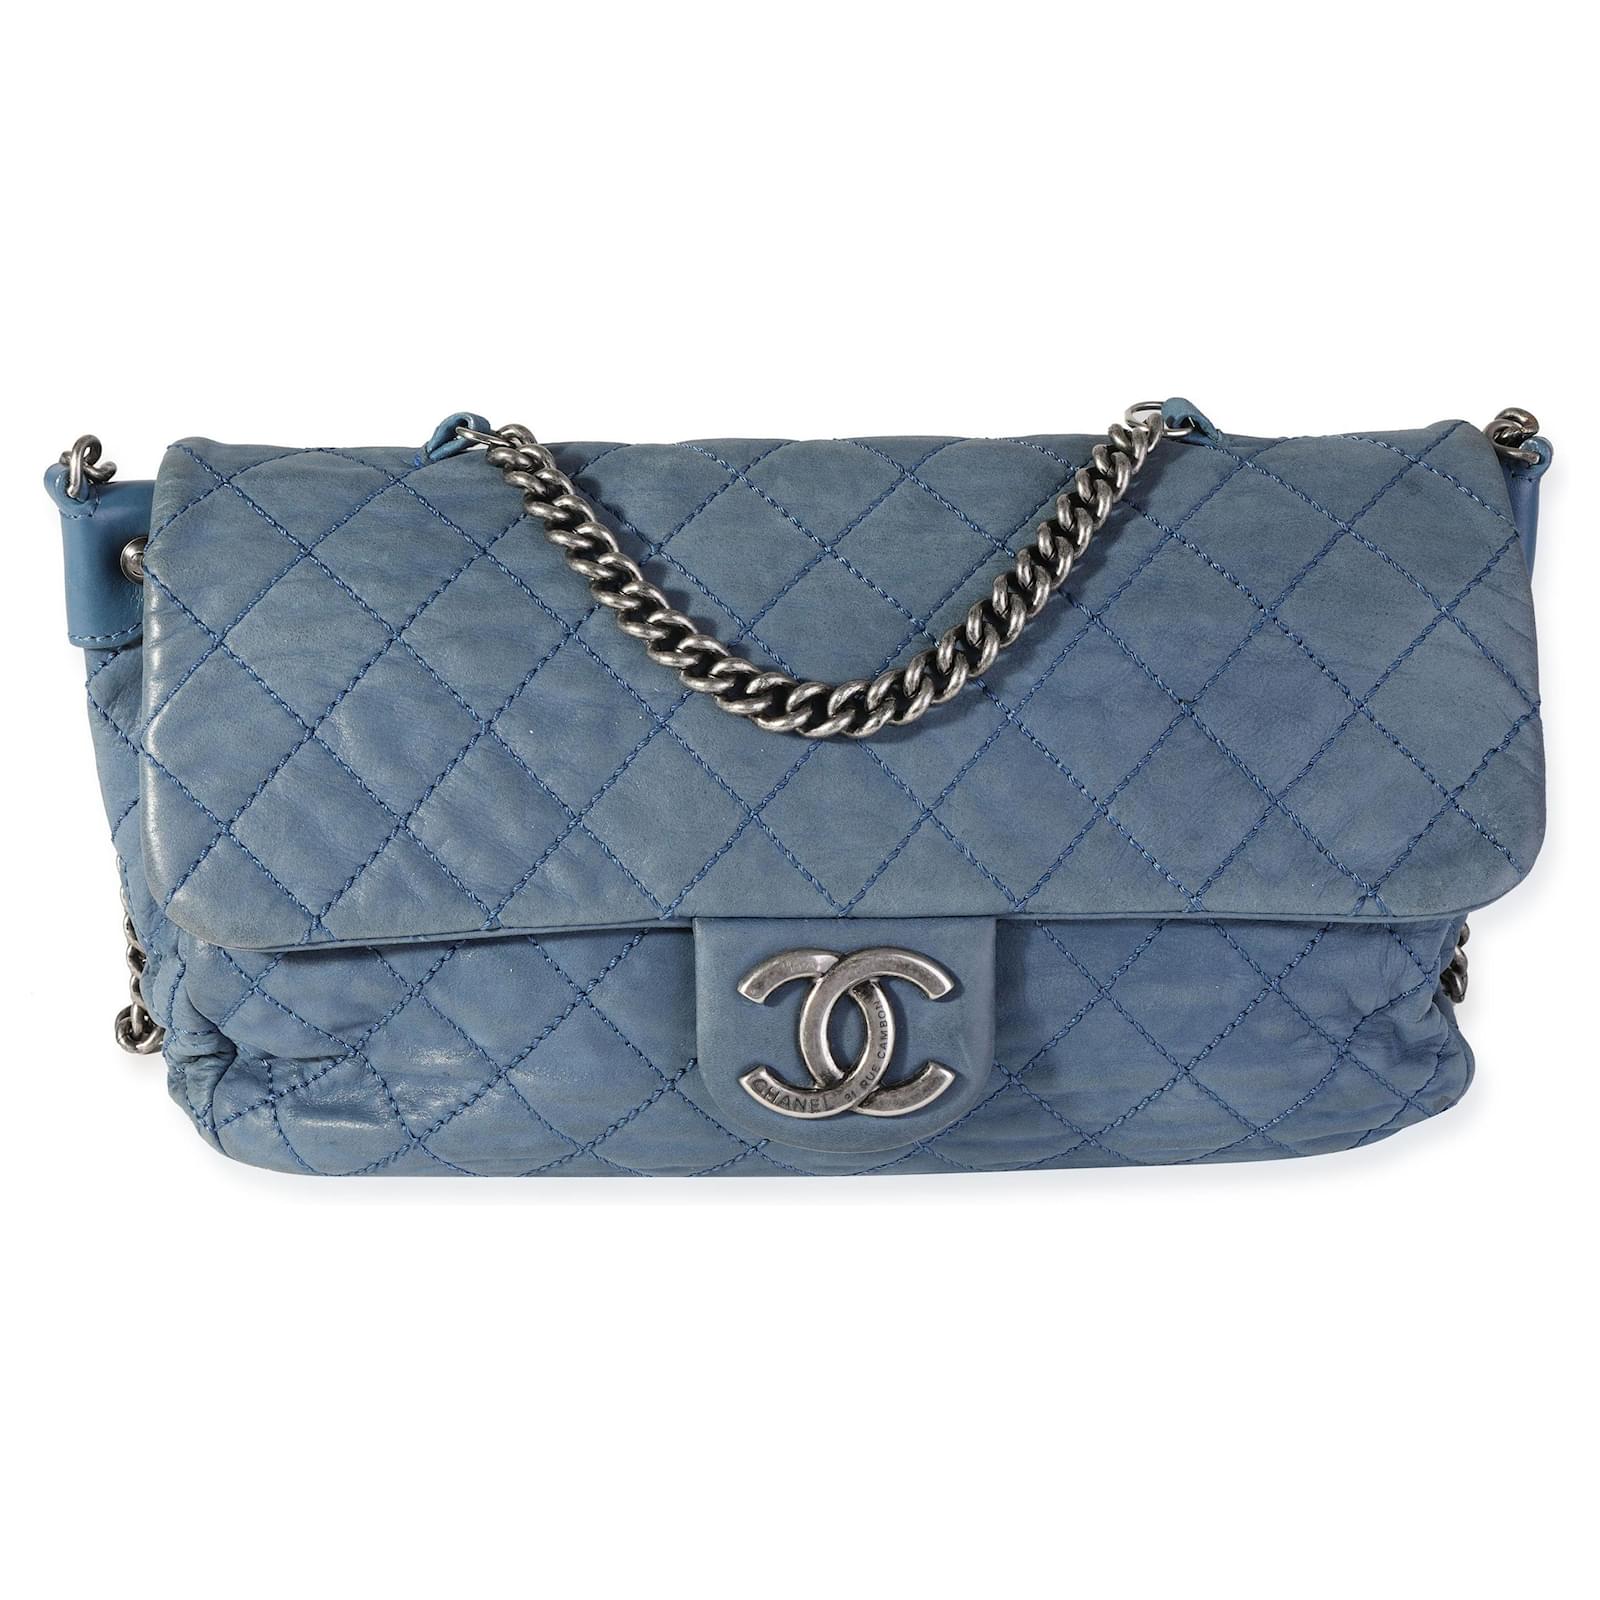 Chanel Blue Quilted Iridescent calf leather Medium Coco Daily Flap